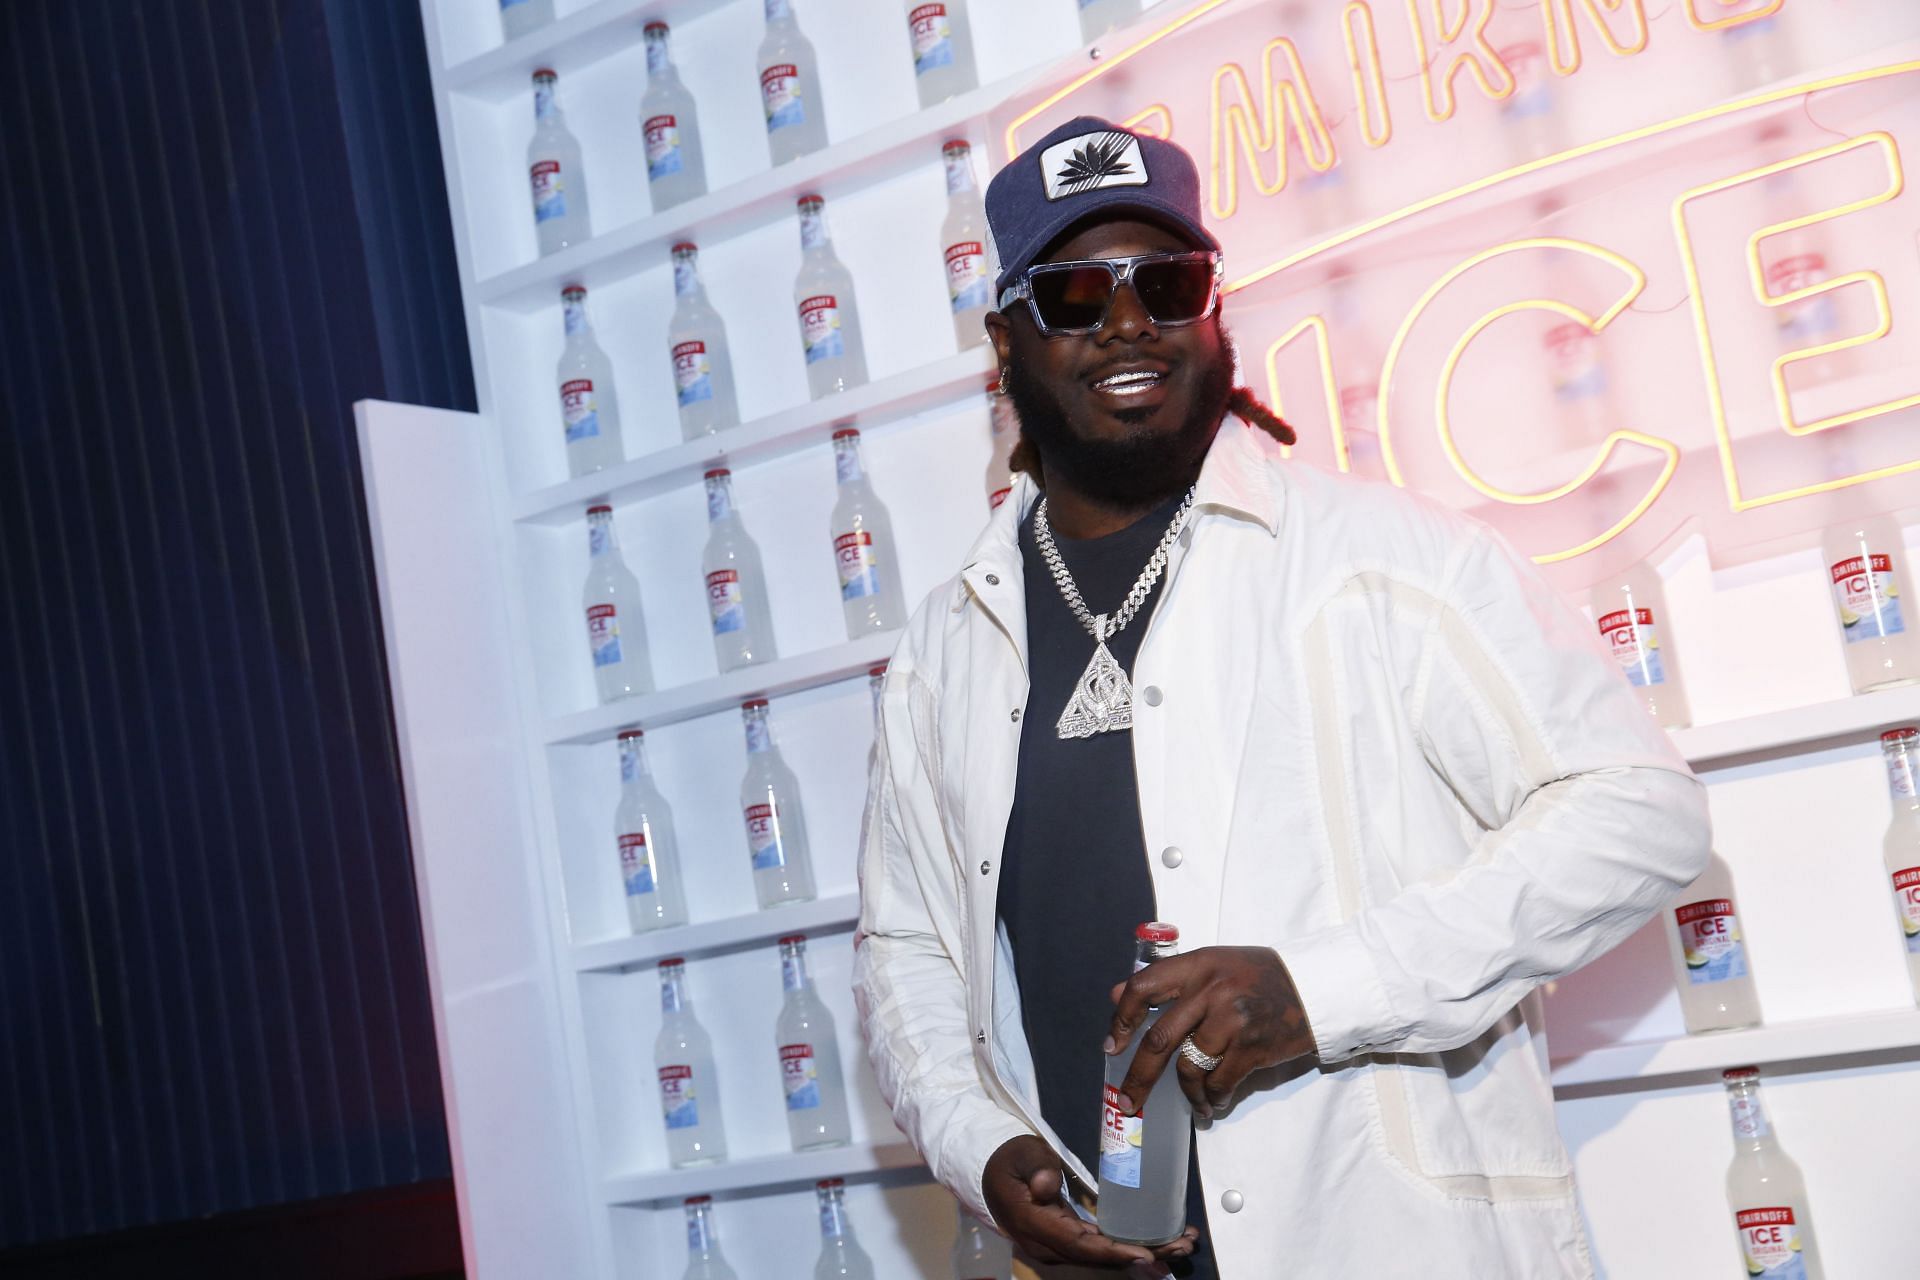 Smirnoff ICE Teams Up with T-Pain, Shaggy, DJ Moma, DaniLeigh and Host Nicky Hilton for First Leg of Smirnoff ICE Relaunch Tour In New York City